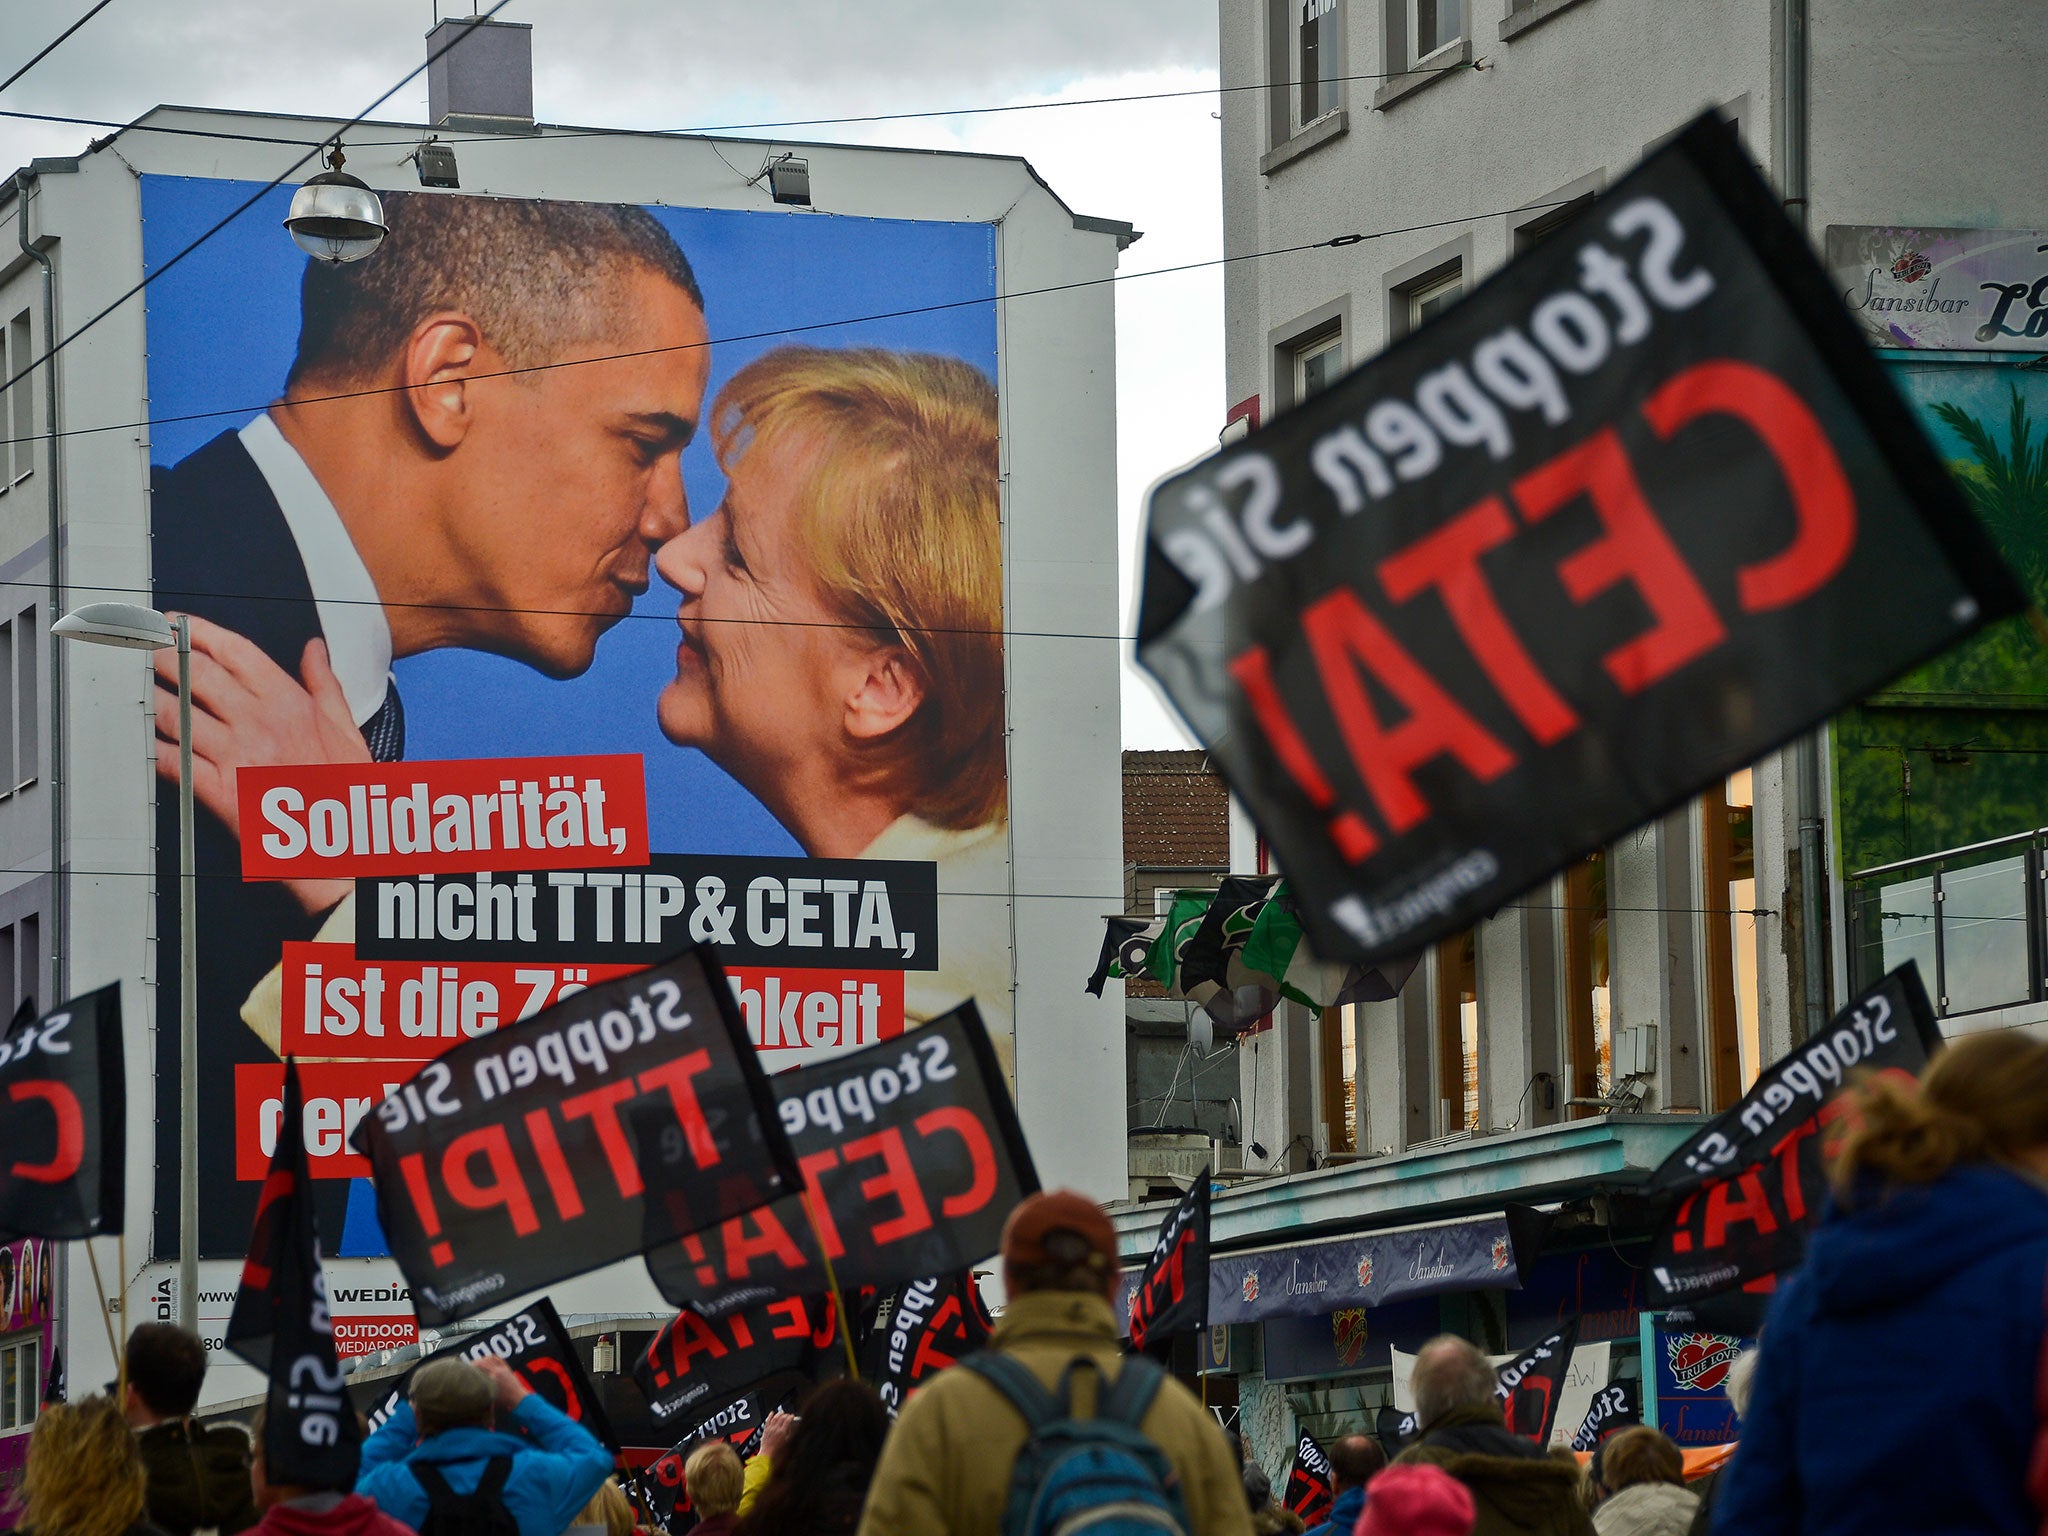 Our next target must be CETA – a deal which has received far less attention than TTIP